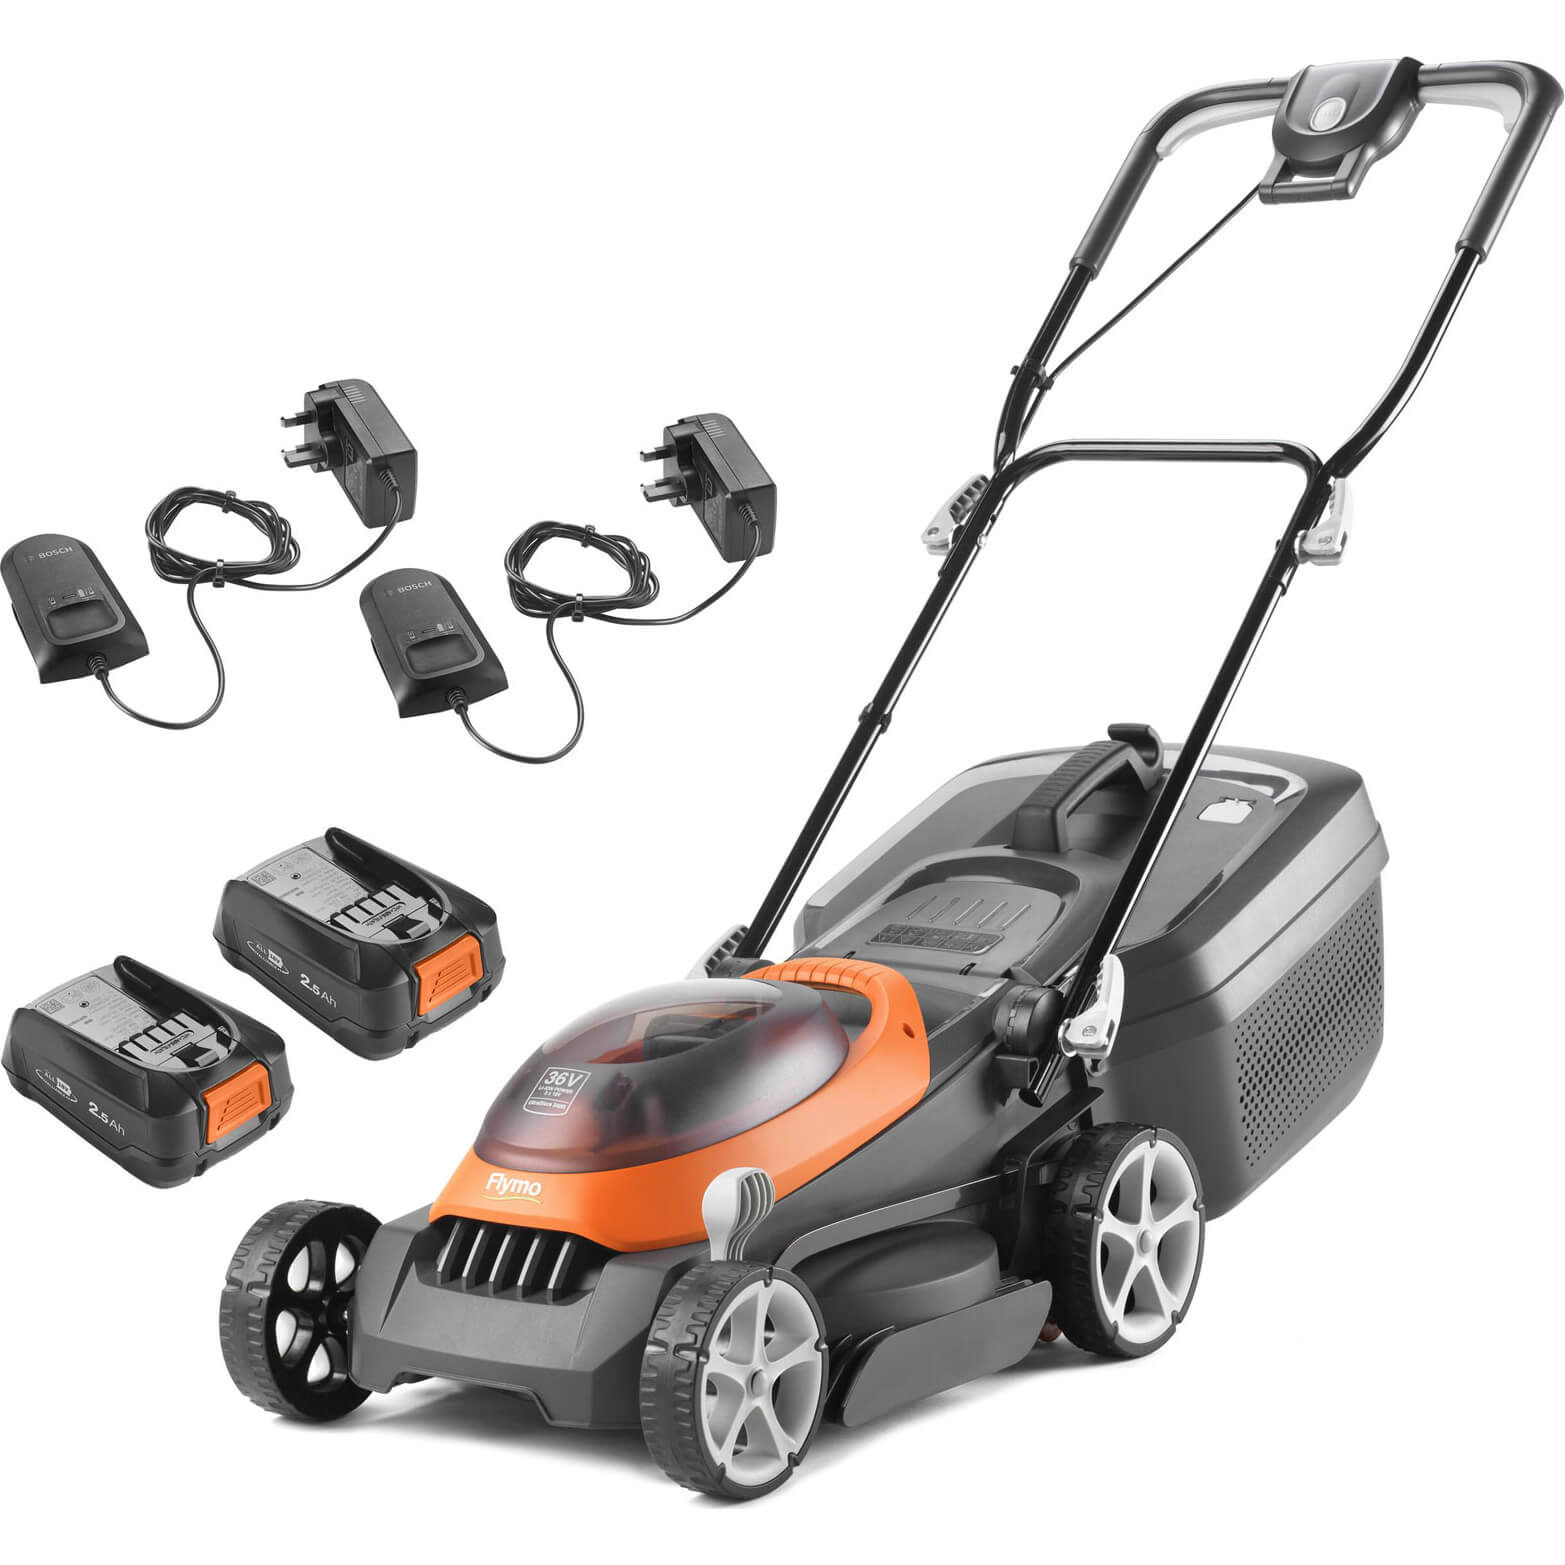 Image of Flymo ULTRASTORE 340R P4A 36v Cordless Rotary Lawnmower 340mm 2 x 2.5ah Li-ion Charger